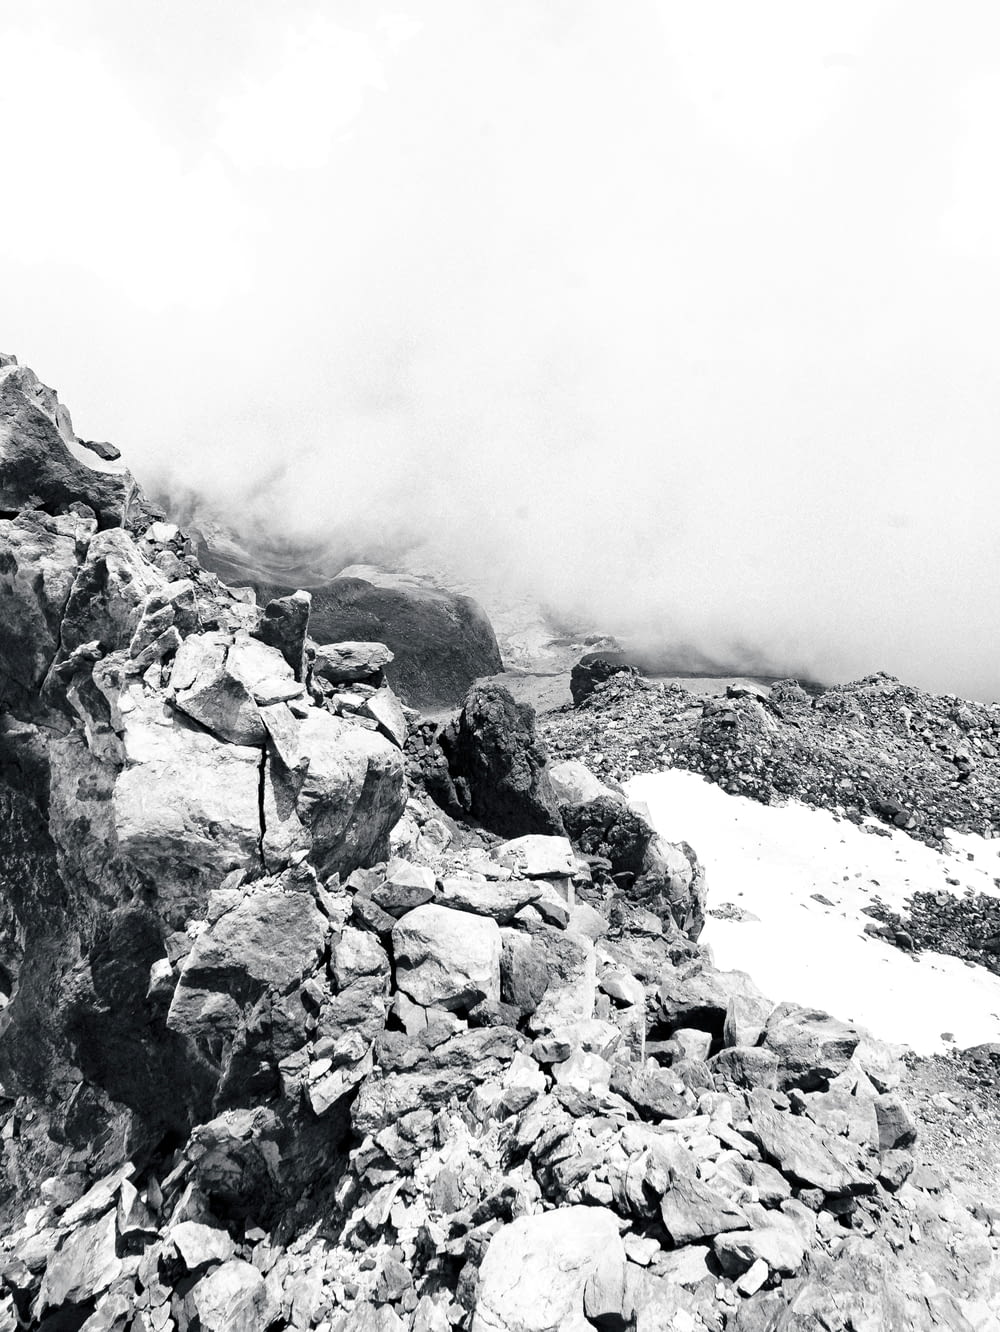 a black and white photo of a person on a mountain